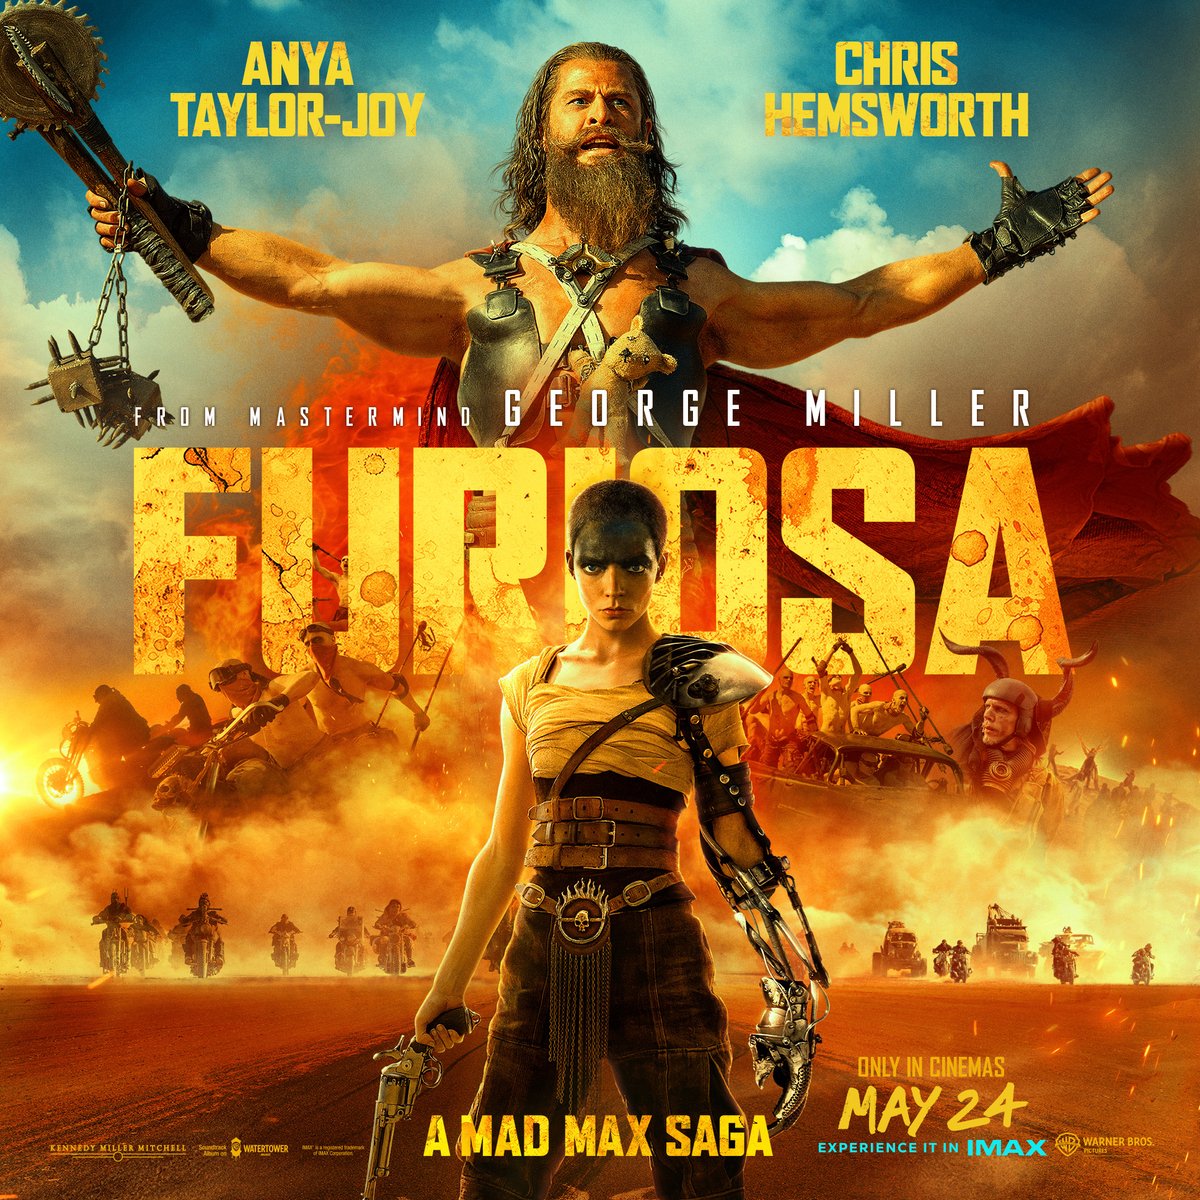 MAD MAX IS BACK! Opening this weekend at Riverside....FURIOSA From director George Miller, the mastermind behind the mindblowing MAD MAX: FURY ROAD...comes a new story in the Mad Max universe....with Anya Taylor-Joy and Chris Hemsworth. Book at ow.ly/YpOu50RE5M4